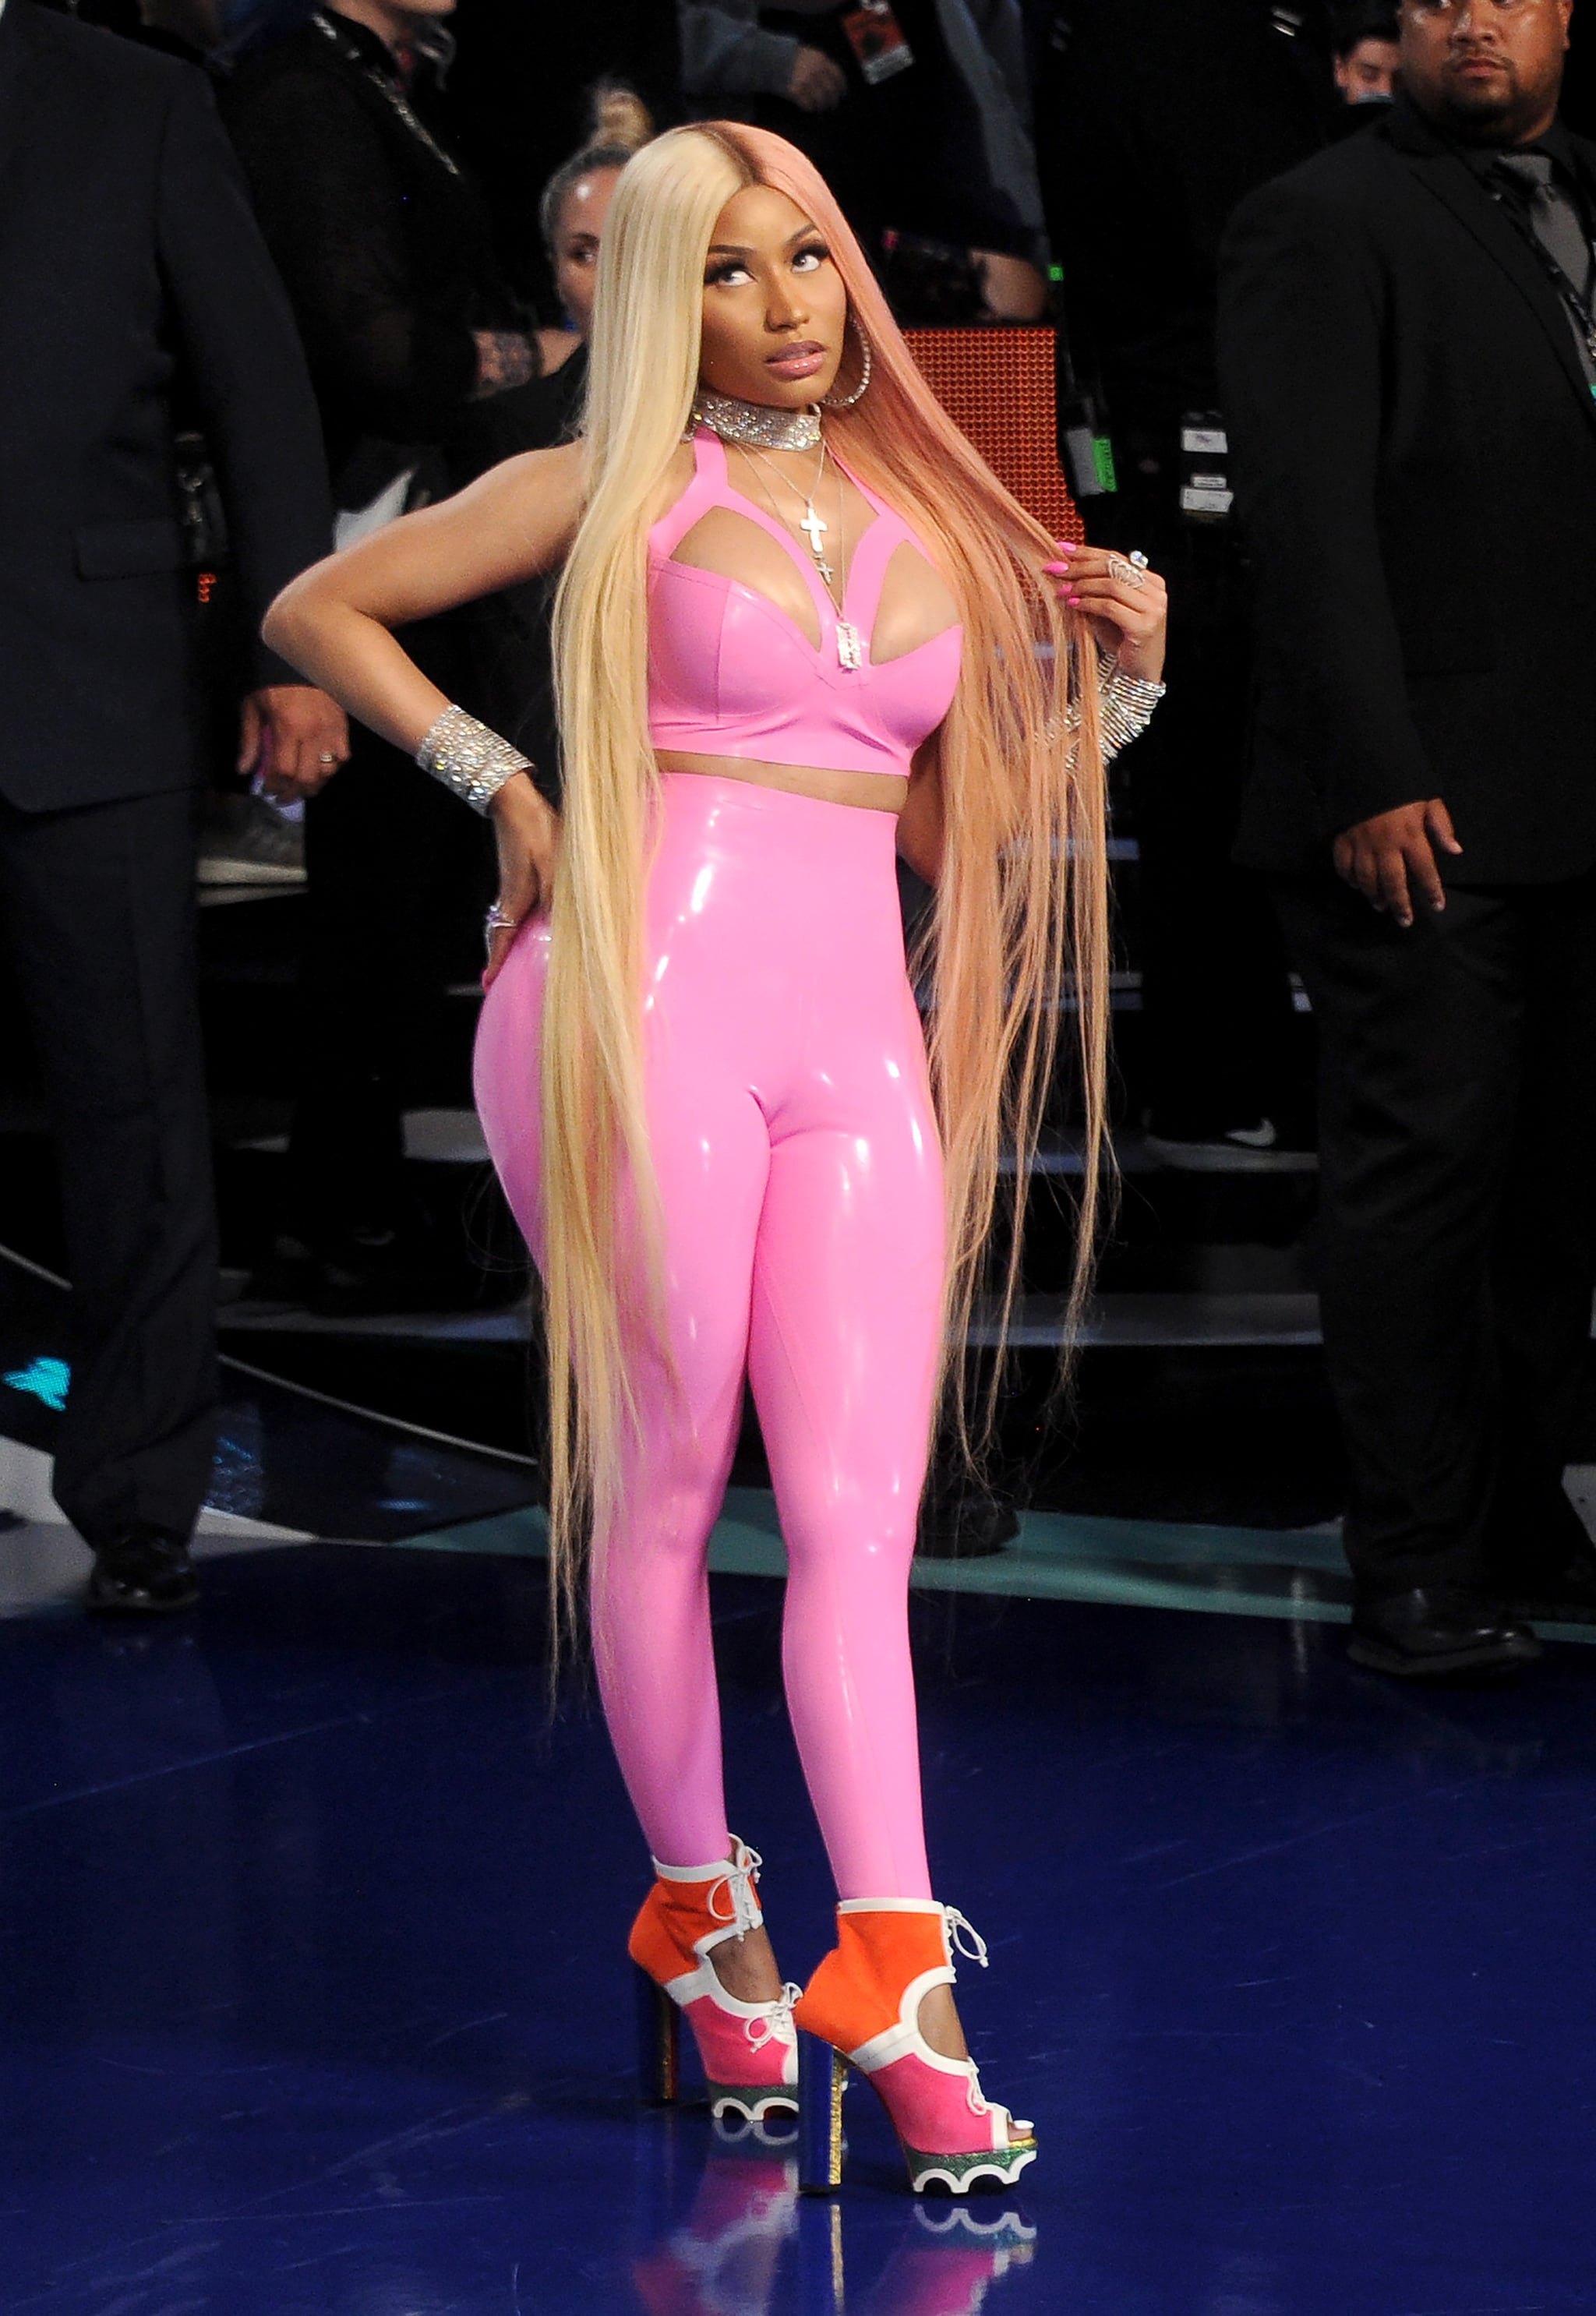 Rapstress Nicki Minaj Looks Pretty in Barbie-Pink Louis Vuitton Outfit From  Head to Toe By Frank Ntambi Link in bio